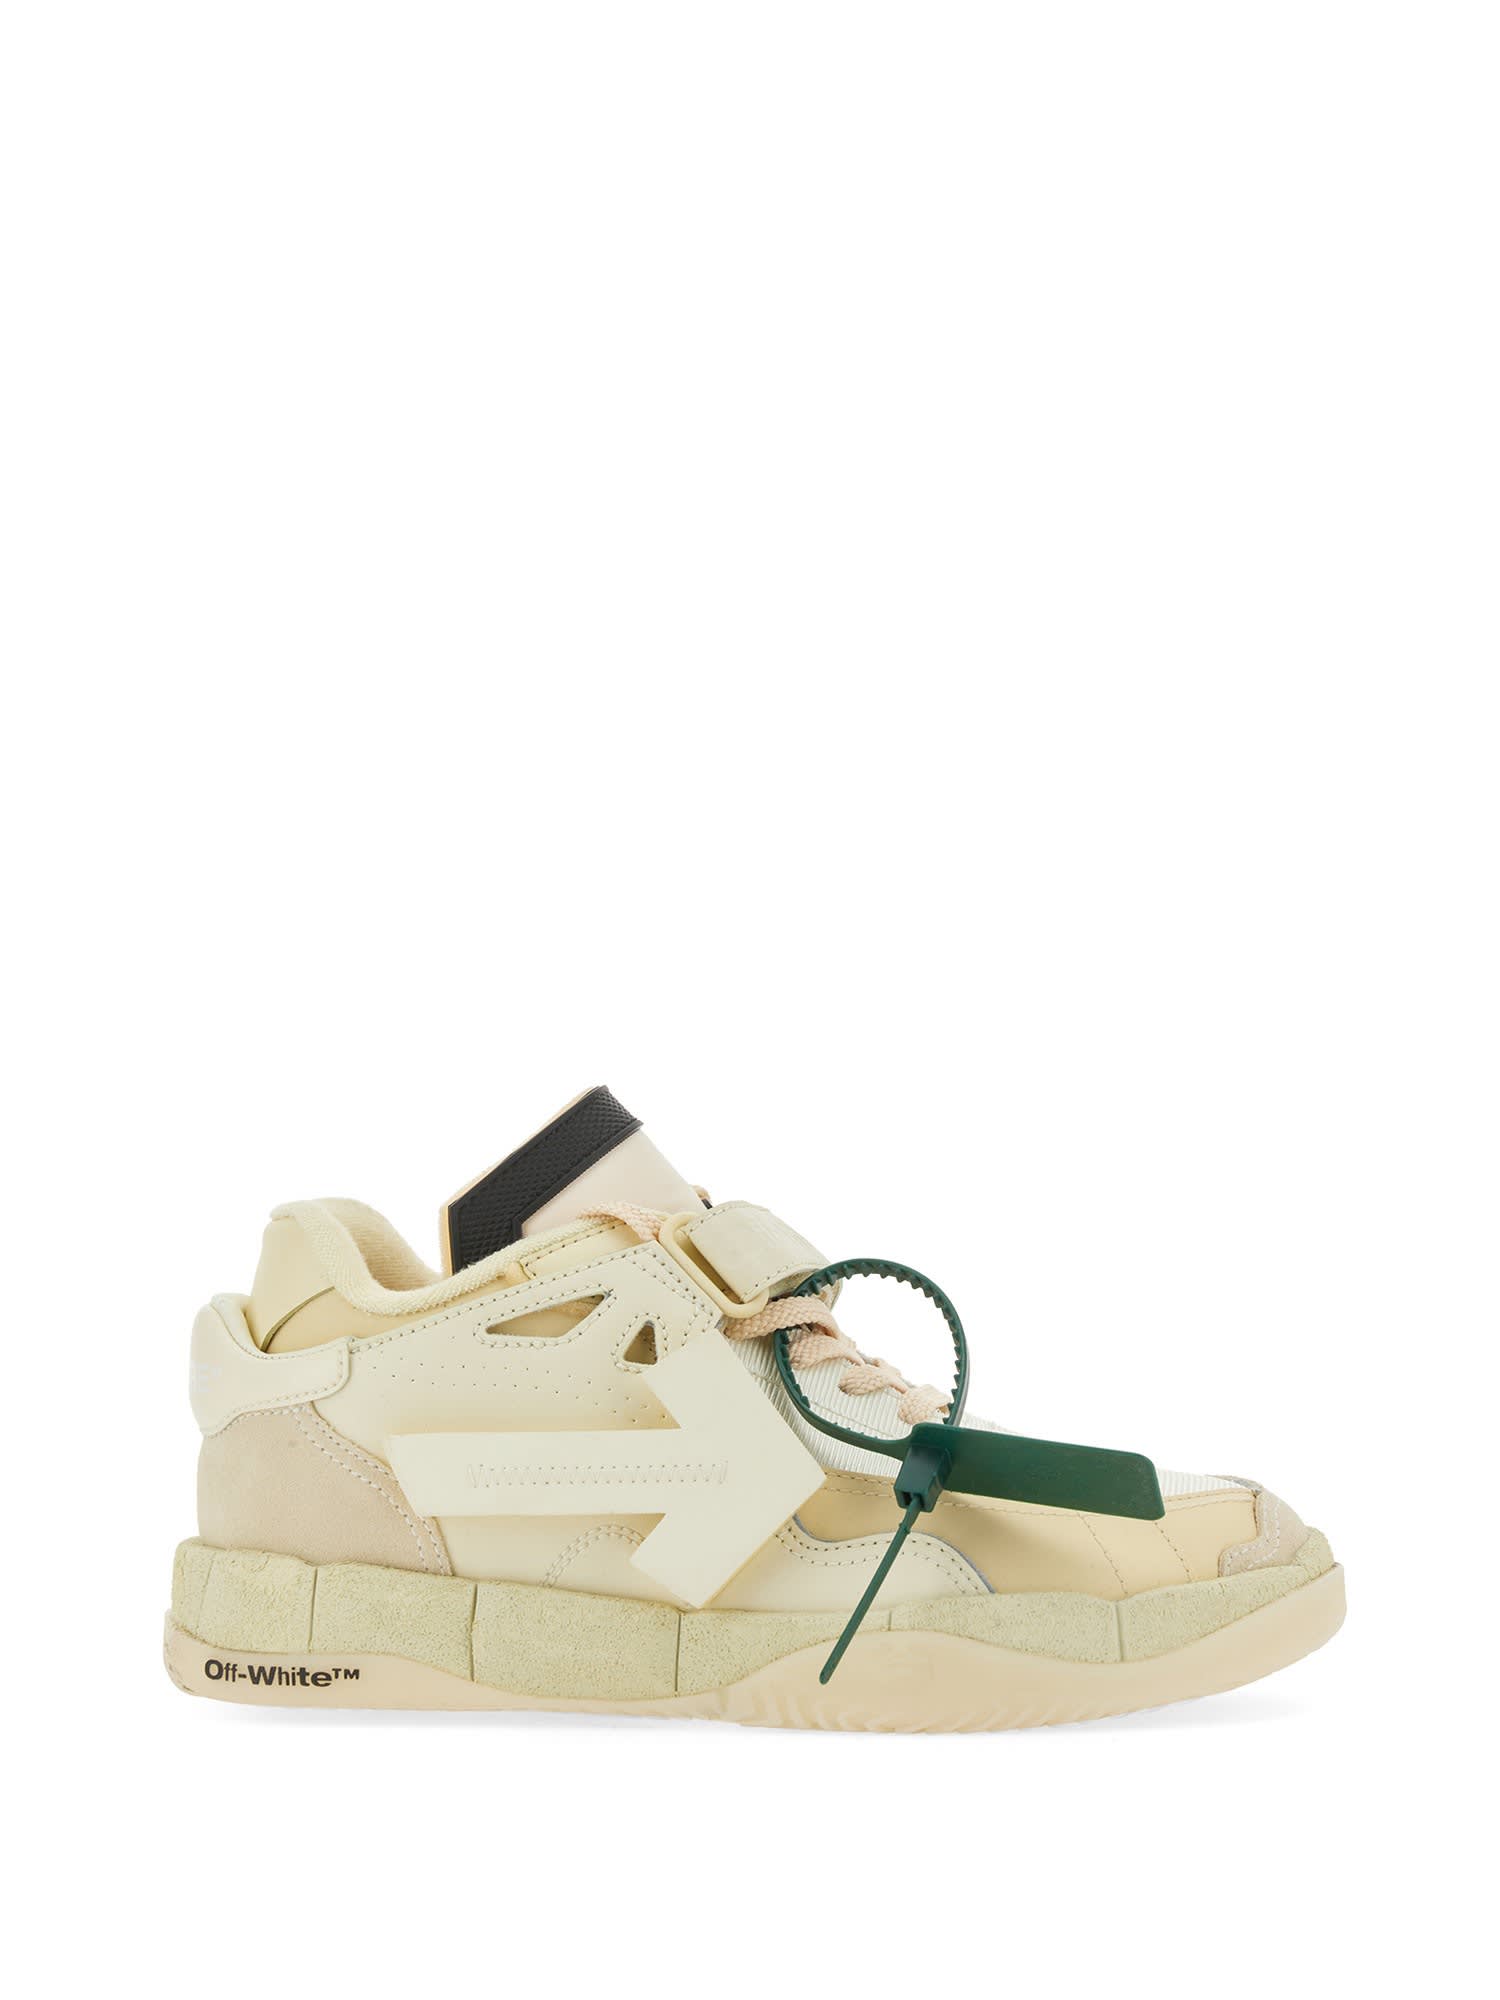 OFF-WHITE LOW TOP SNEAKER